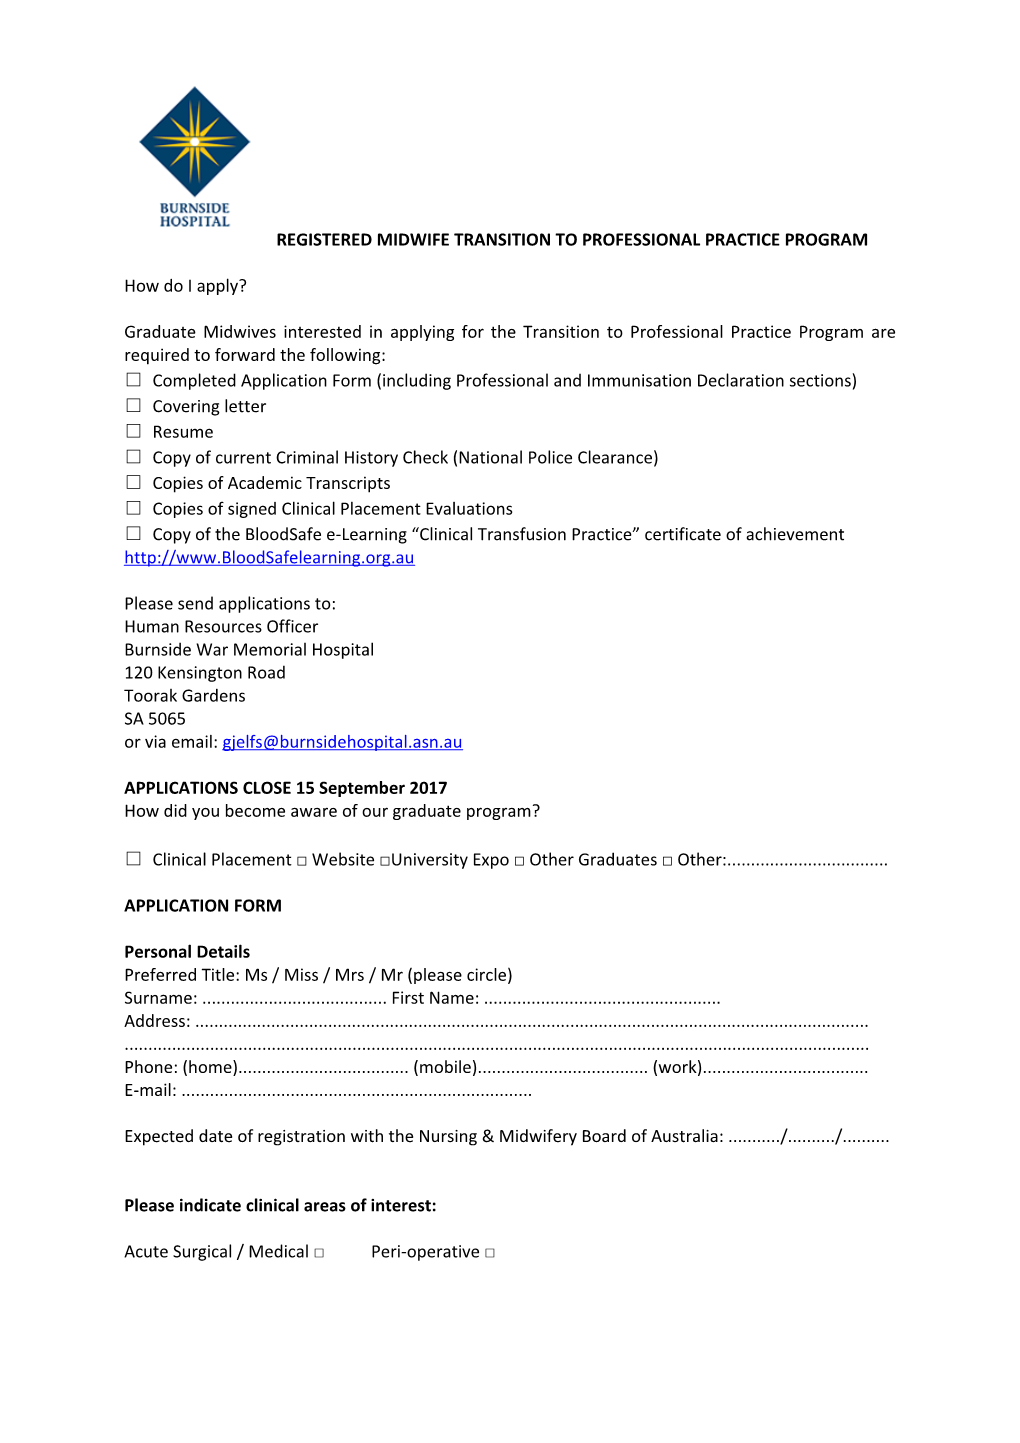 Completed Application Form (Including Professional and Immunisation Declaration Sections)